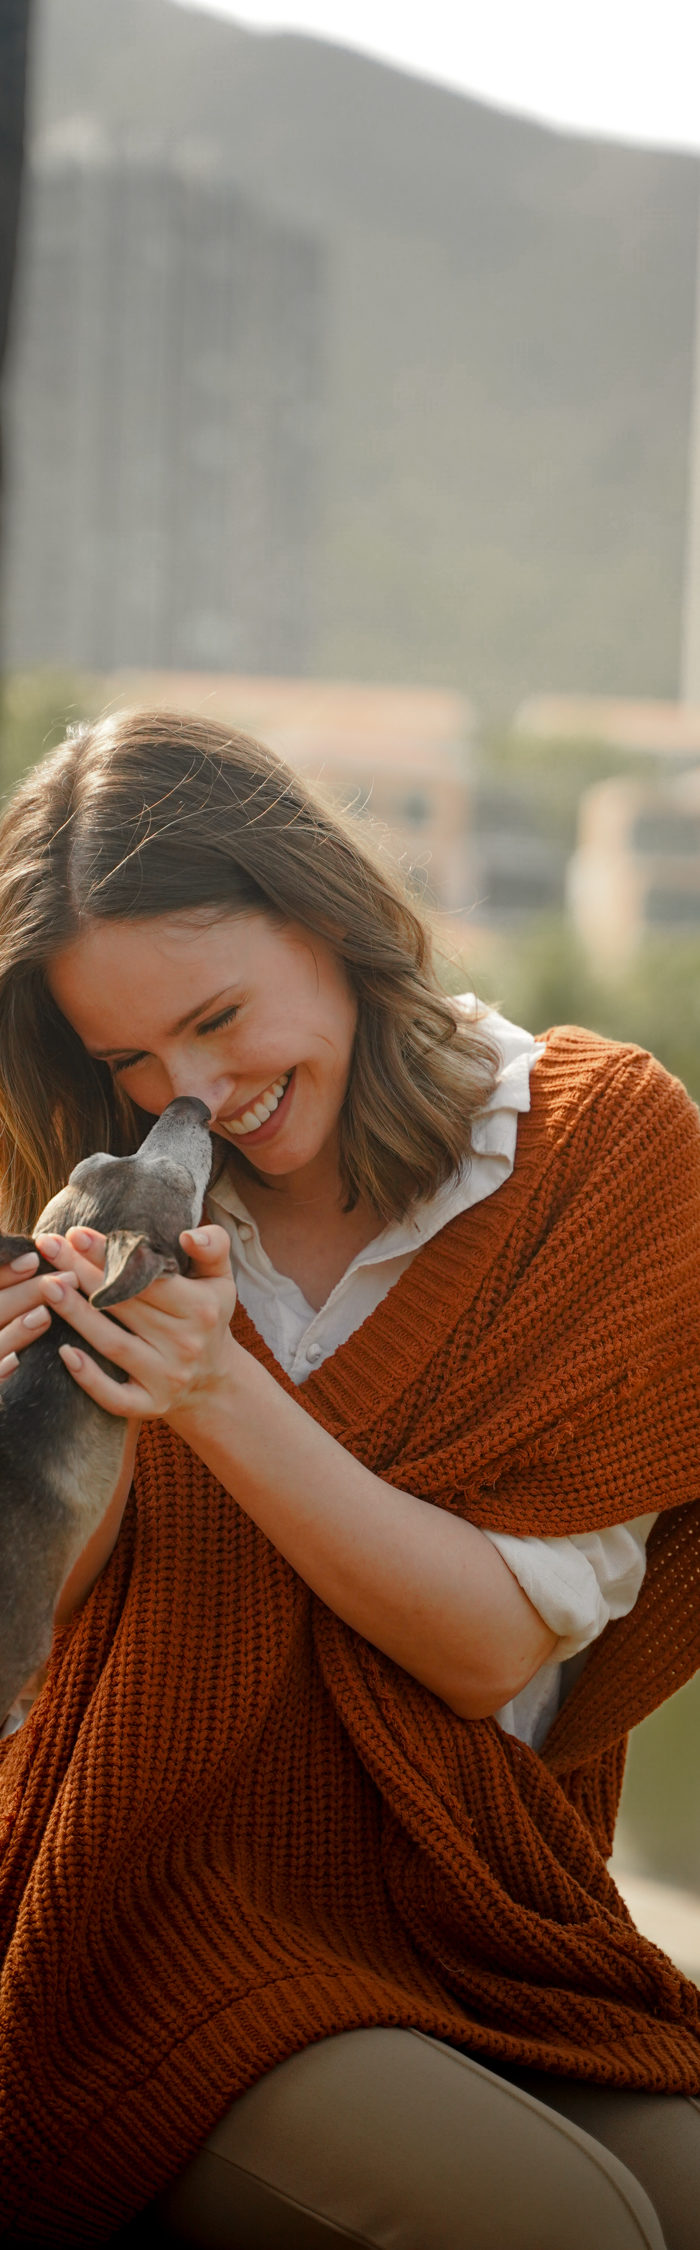 Alyssa Campanella of The A List blog and Argos the dog in Hong Kong